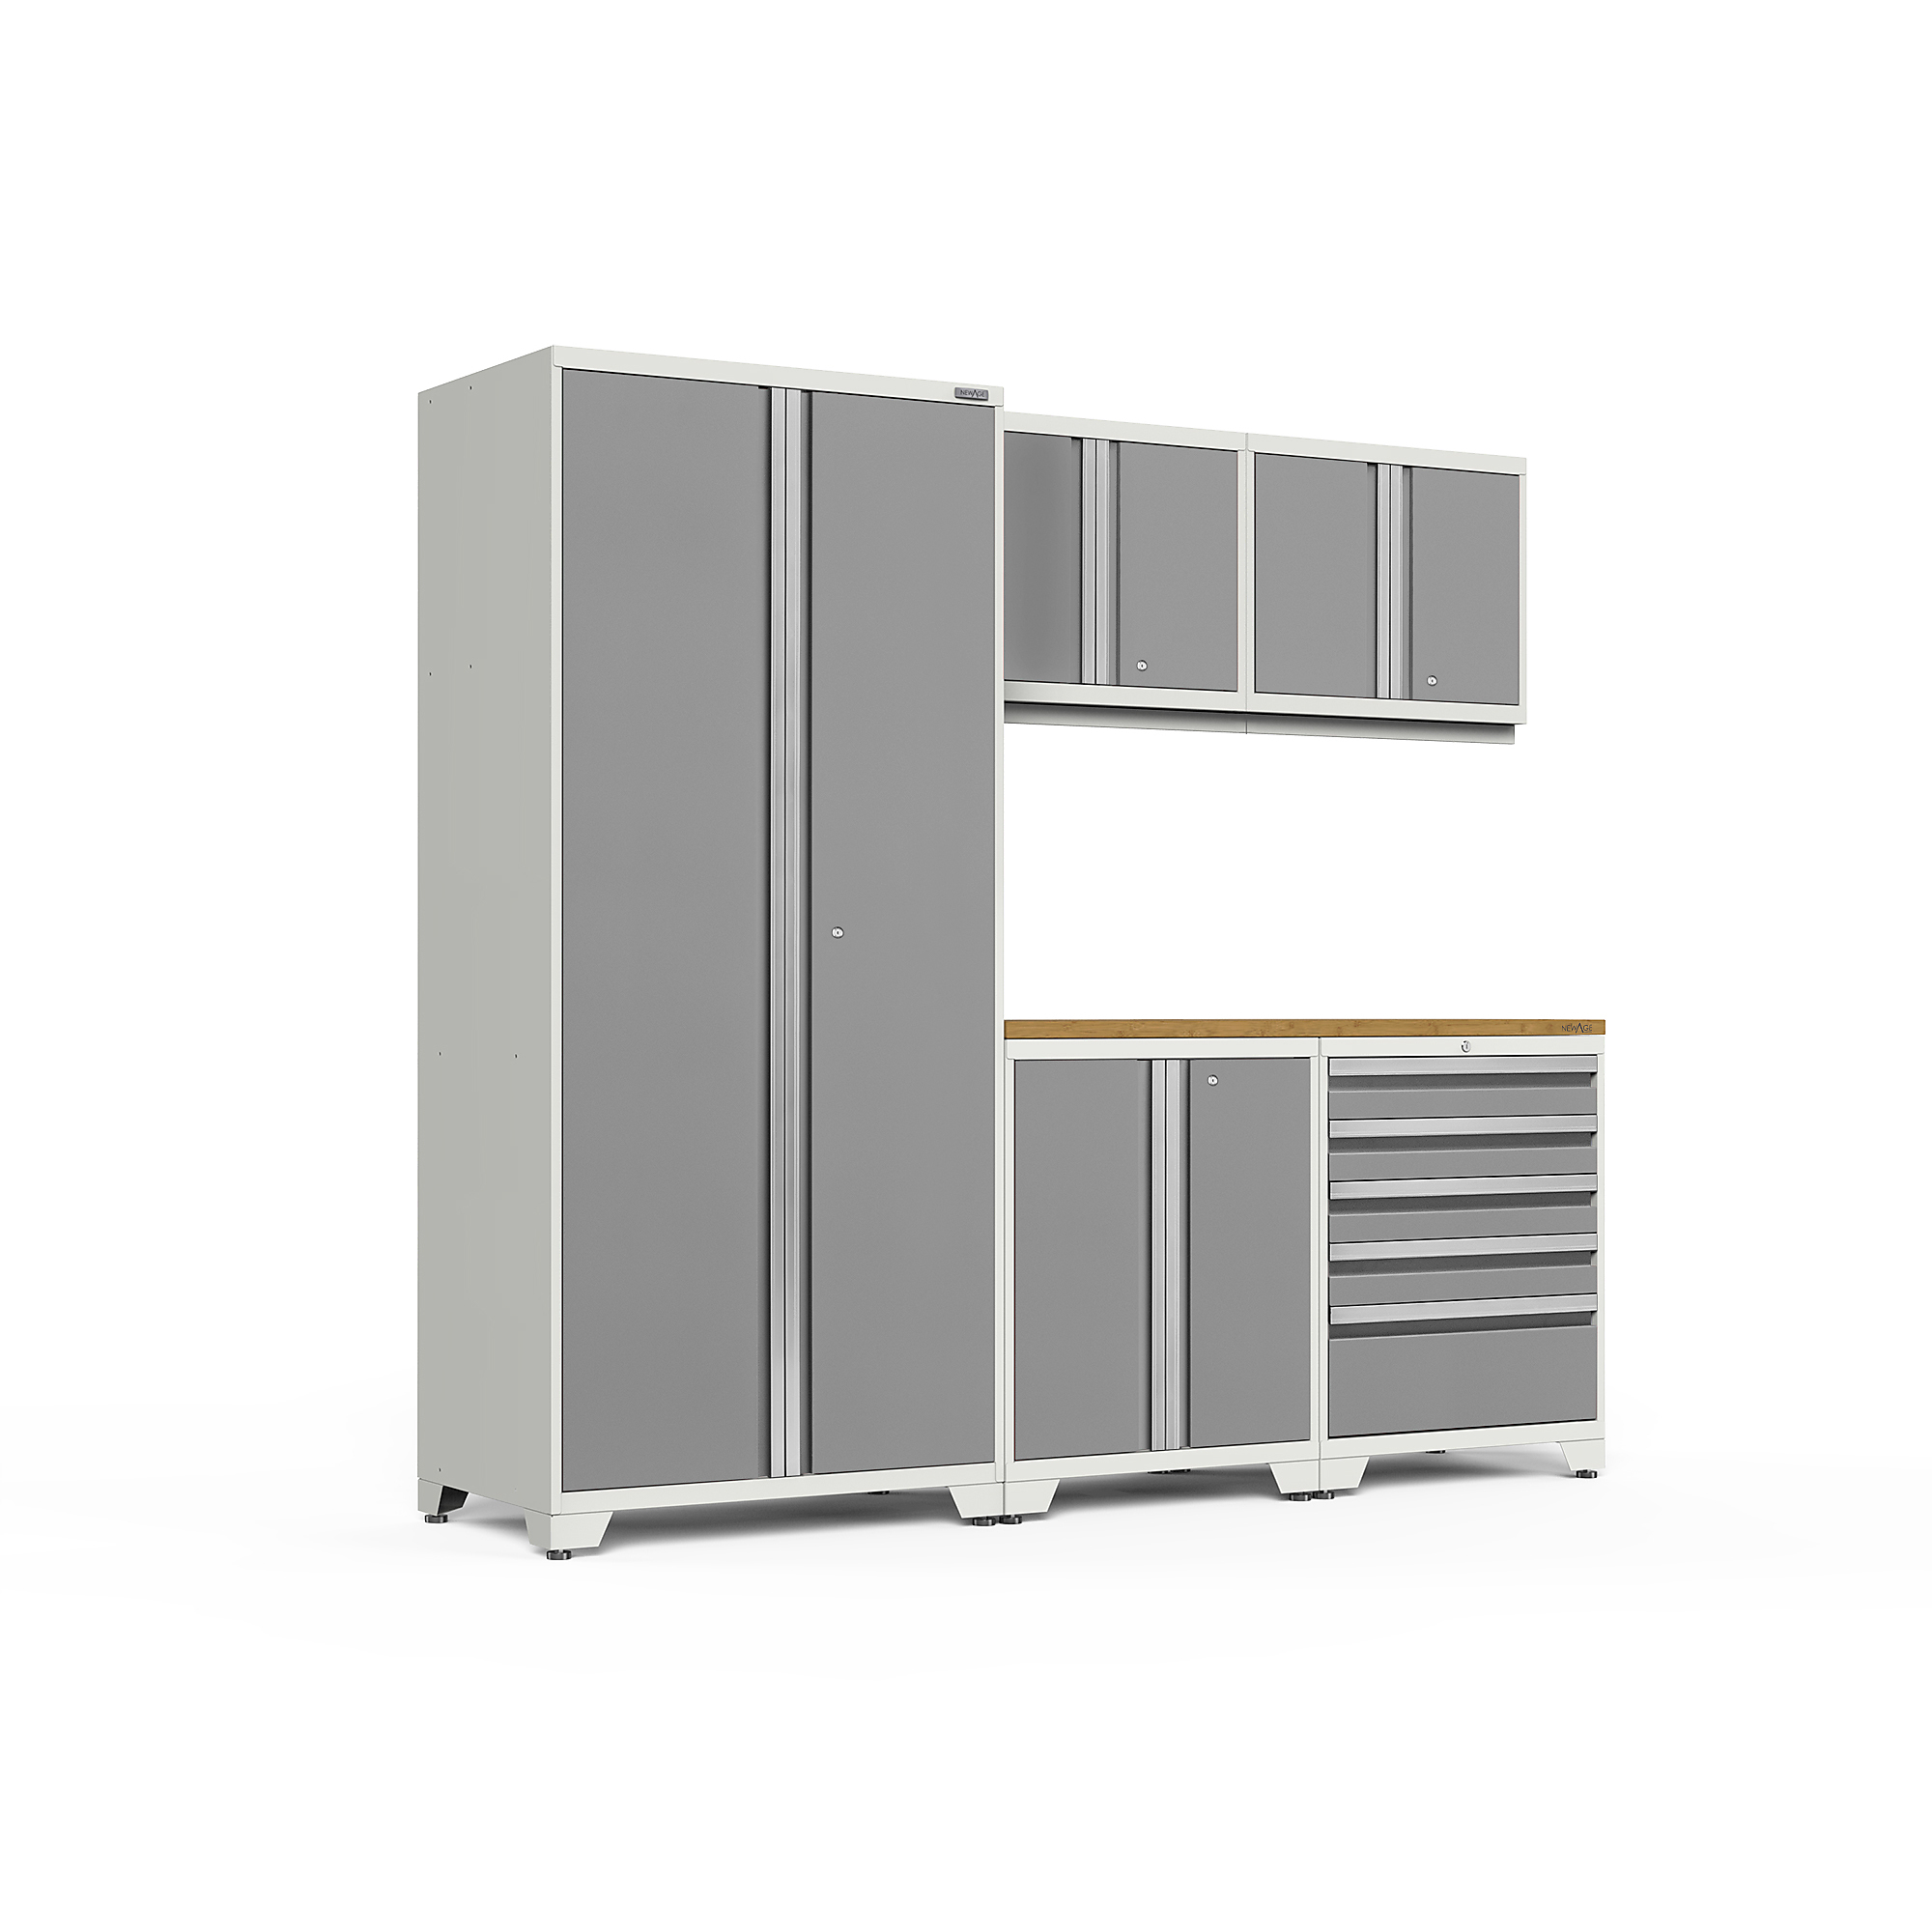 HOLD N' STORAGE Pull Out Cabinet Organizer, Heavy Duty-with Lifetime  Limited -14 W x 21 D - Requires At Least a Cabinet Opening, Steel Metal  cabinet